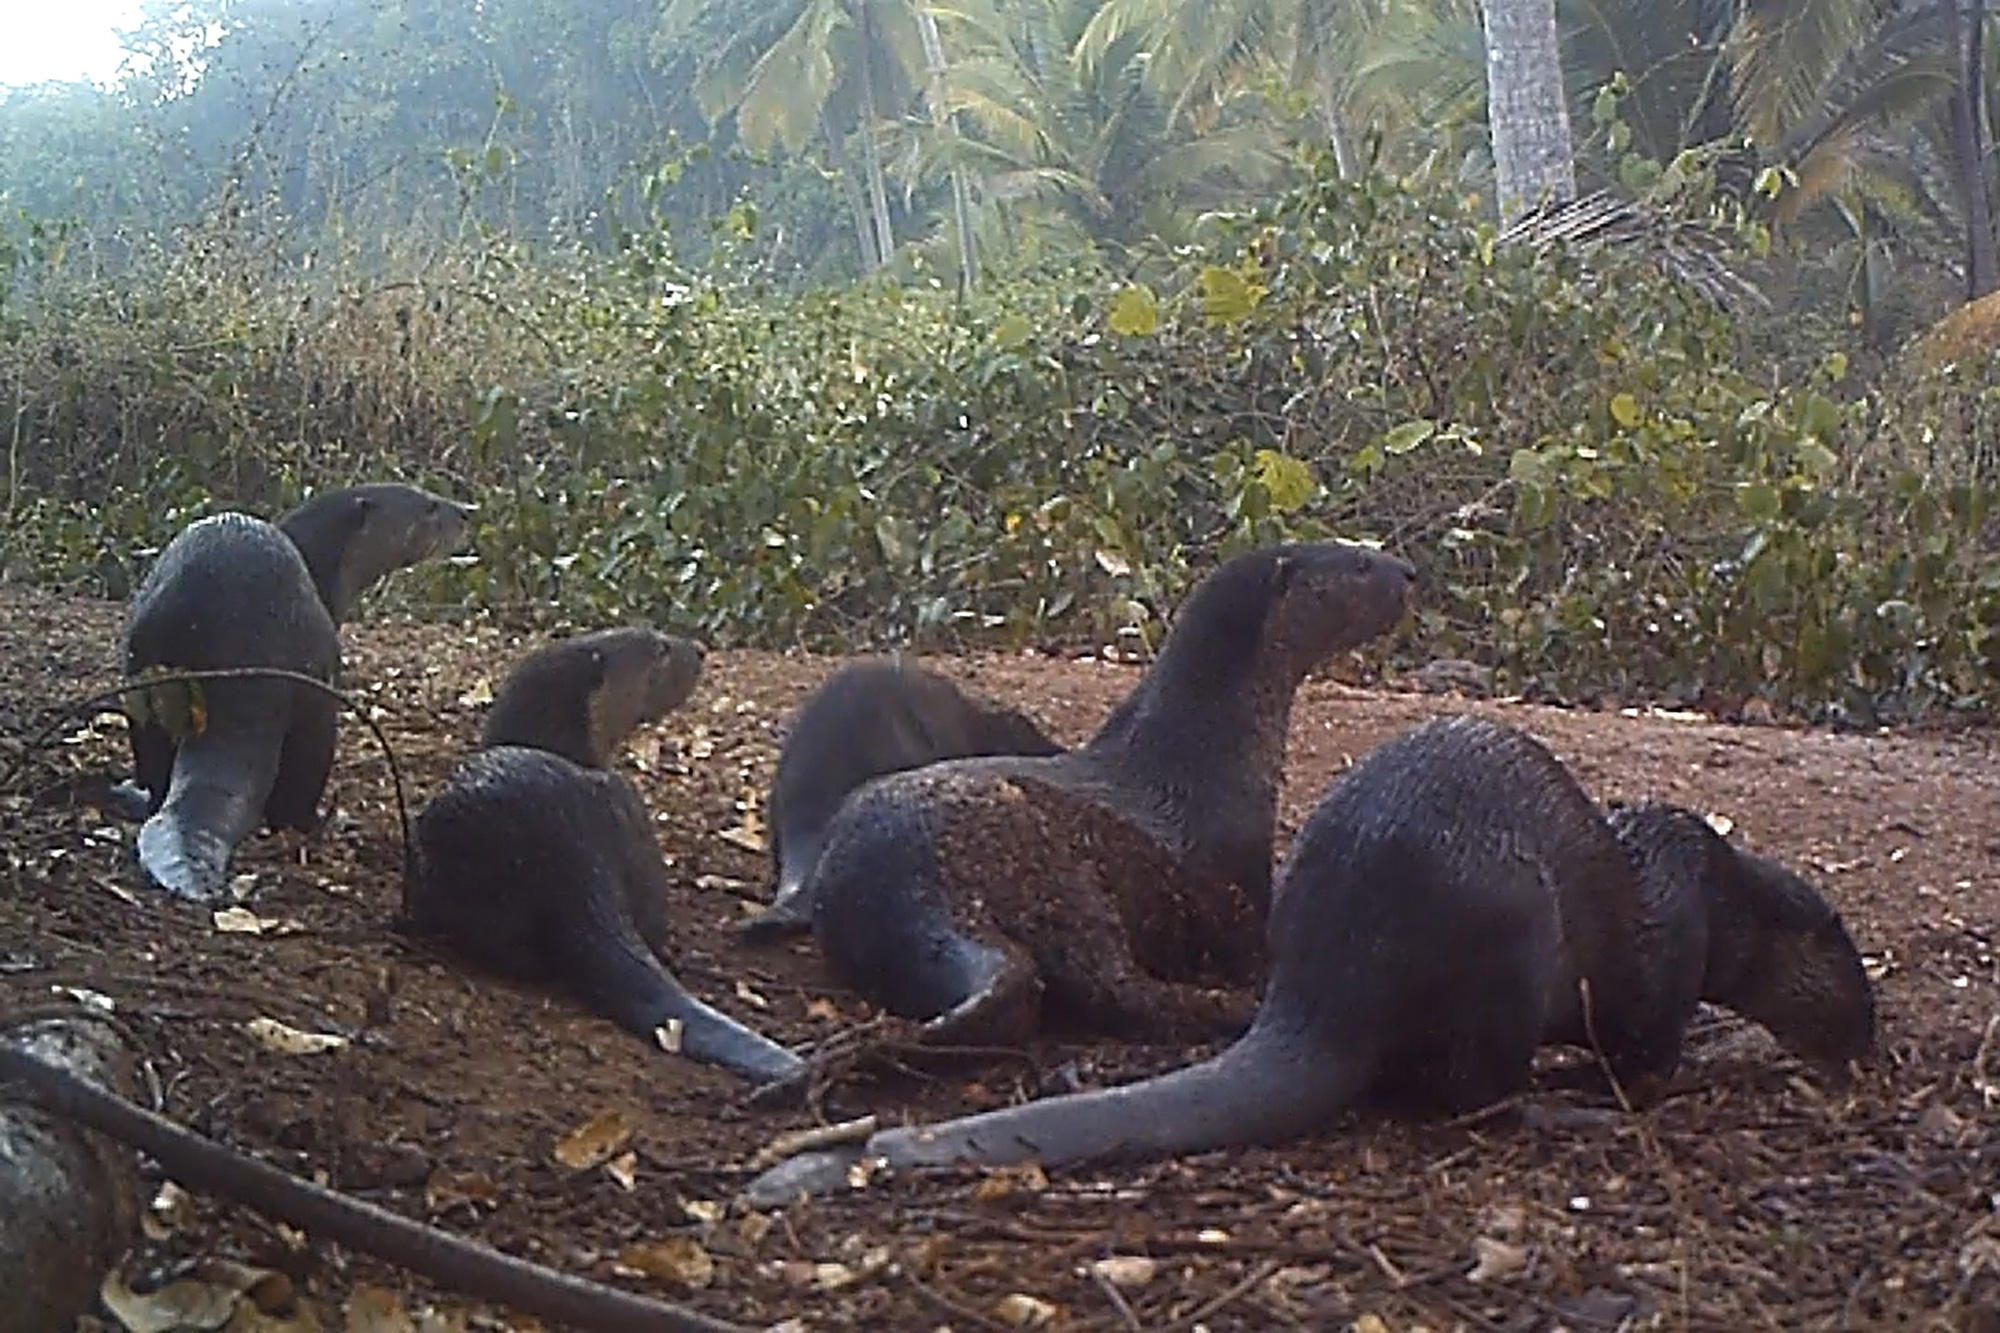 Camera trap picture of smooth-coated otters on Chorao Island in Goa. Katrine Burford-Bradshaw